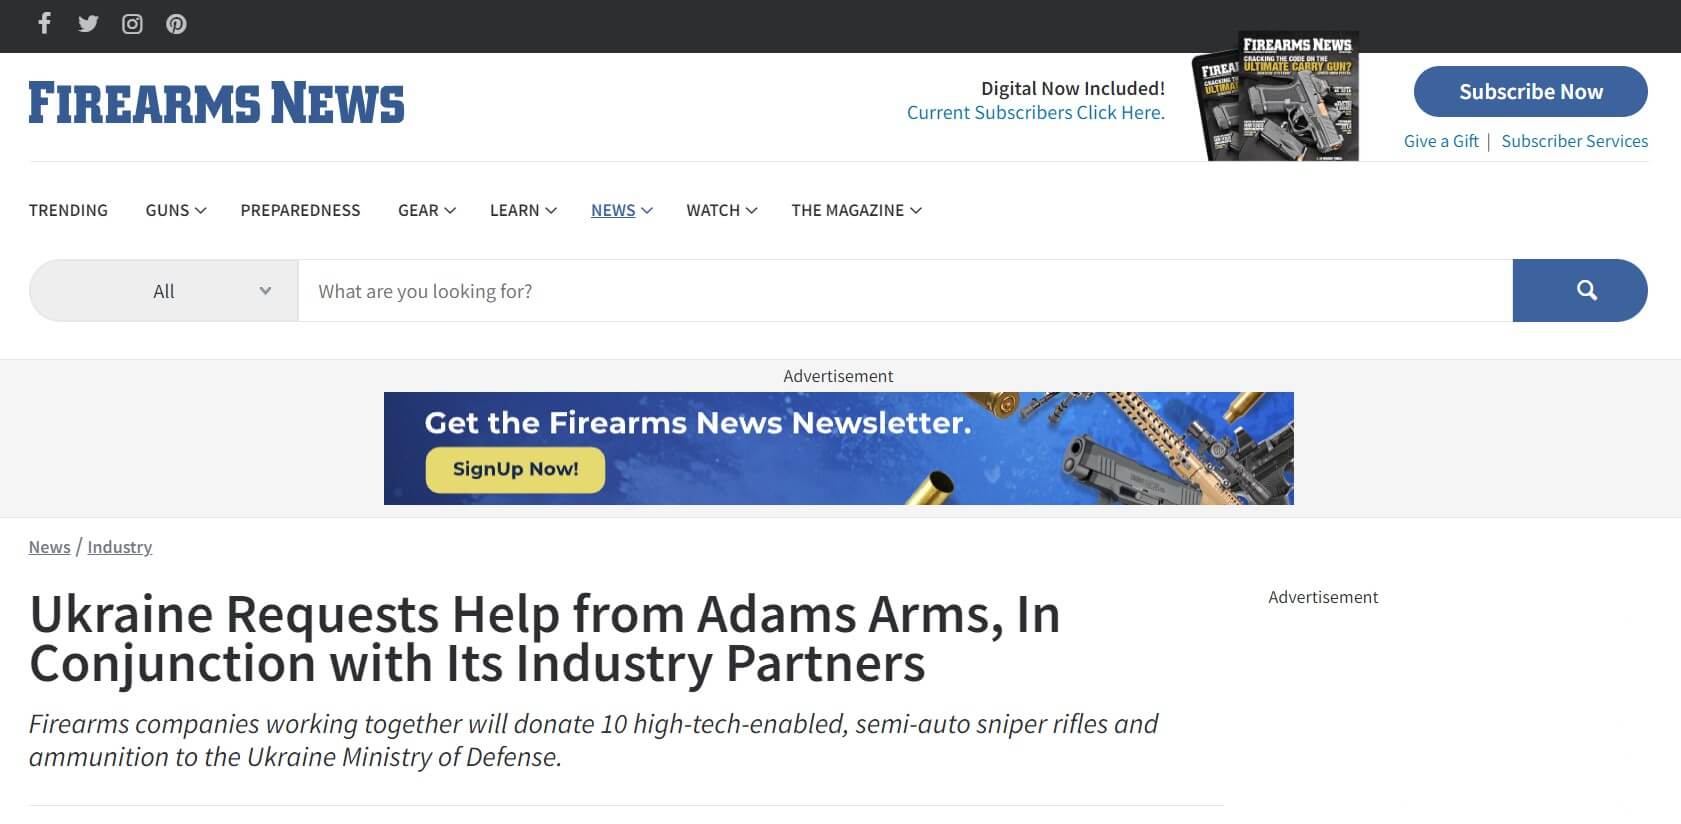 Firearms News article: Ukraine Requests Help from Adams Arms, In Conjunction with Its Industry Partners